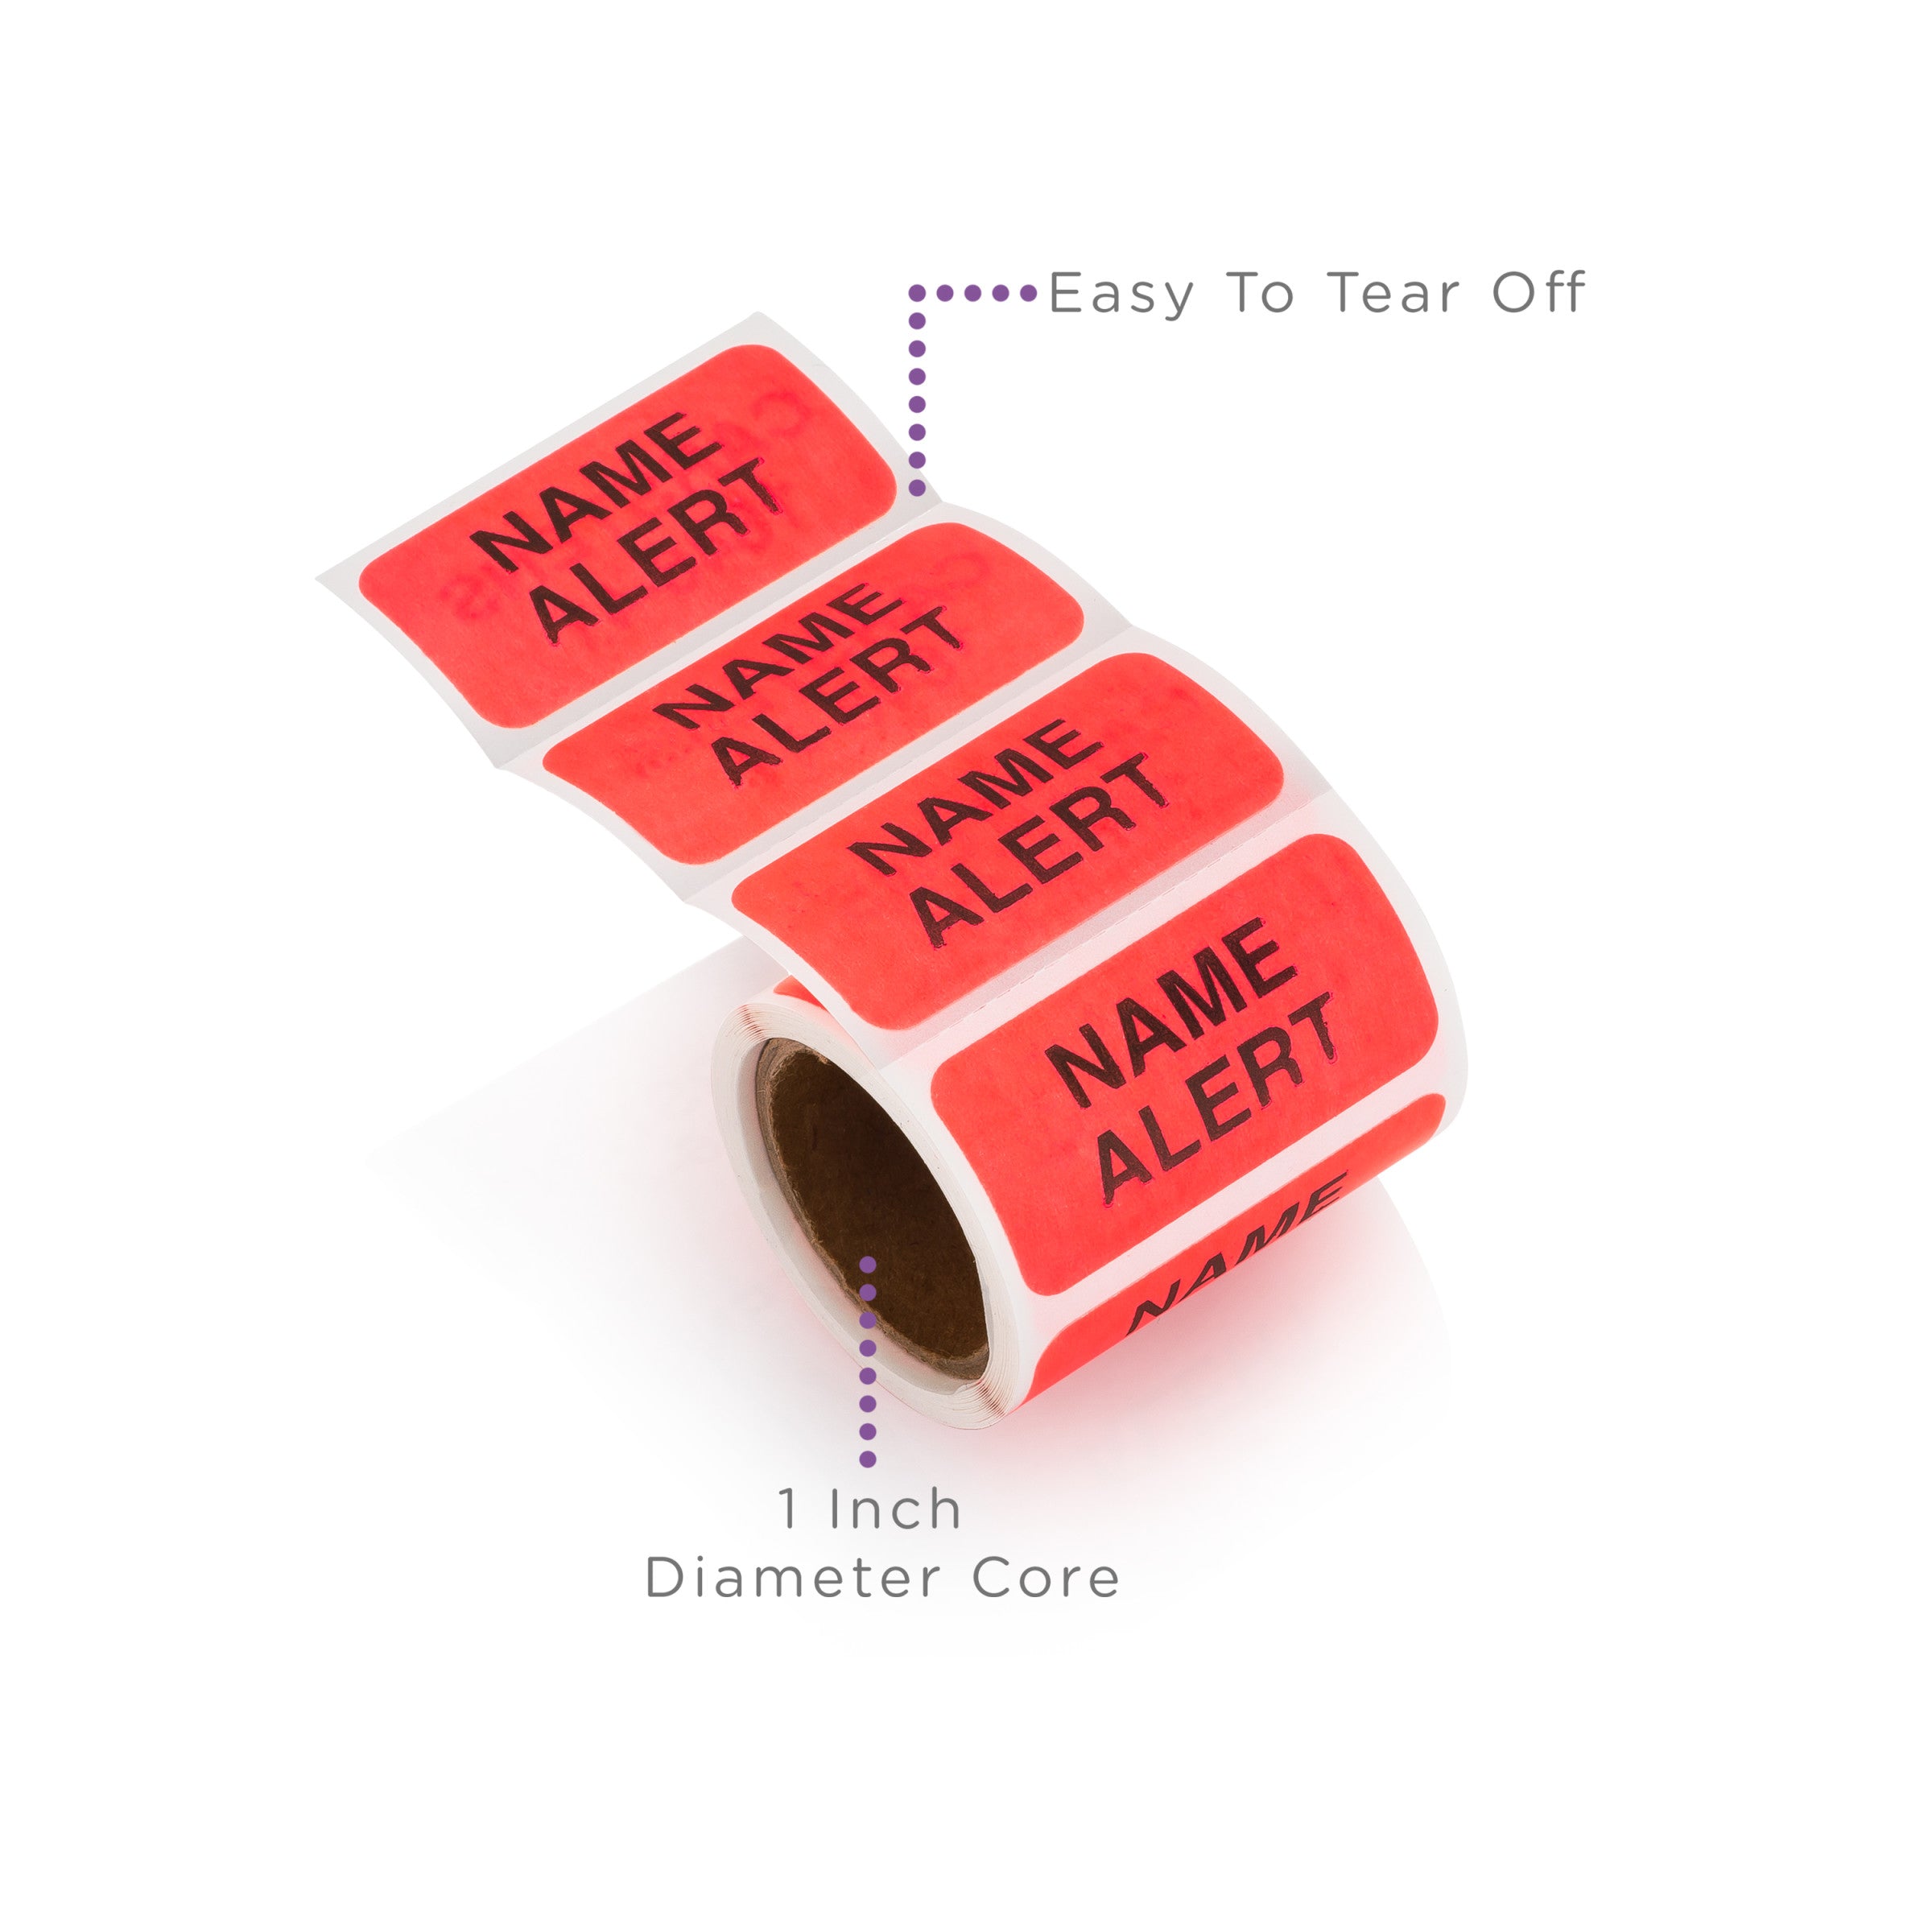 Name Alert, Alert and Instruction Labels, Red, W1.5" x H.75" (Roll of 100)